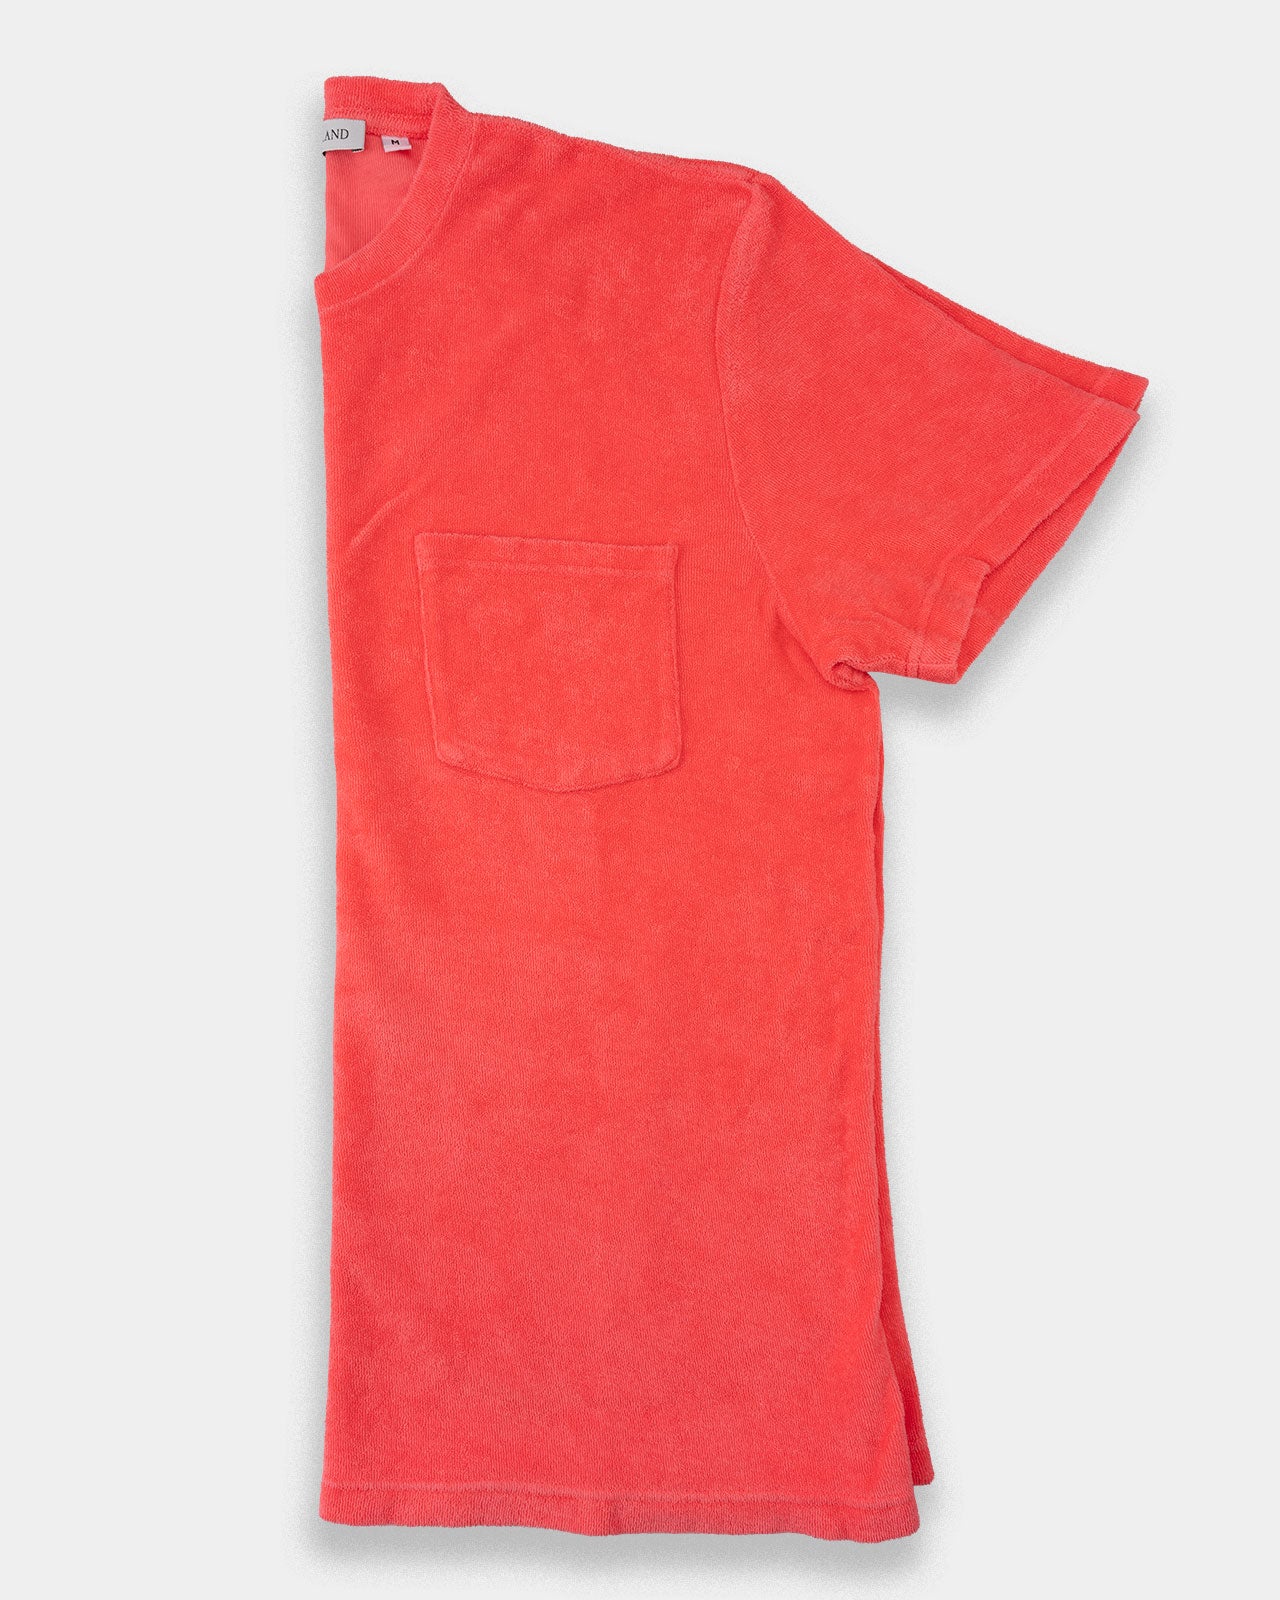 Calypso Coral Terry Short Sleeve T-shirt